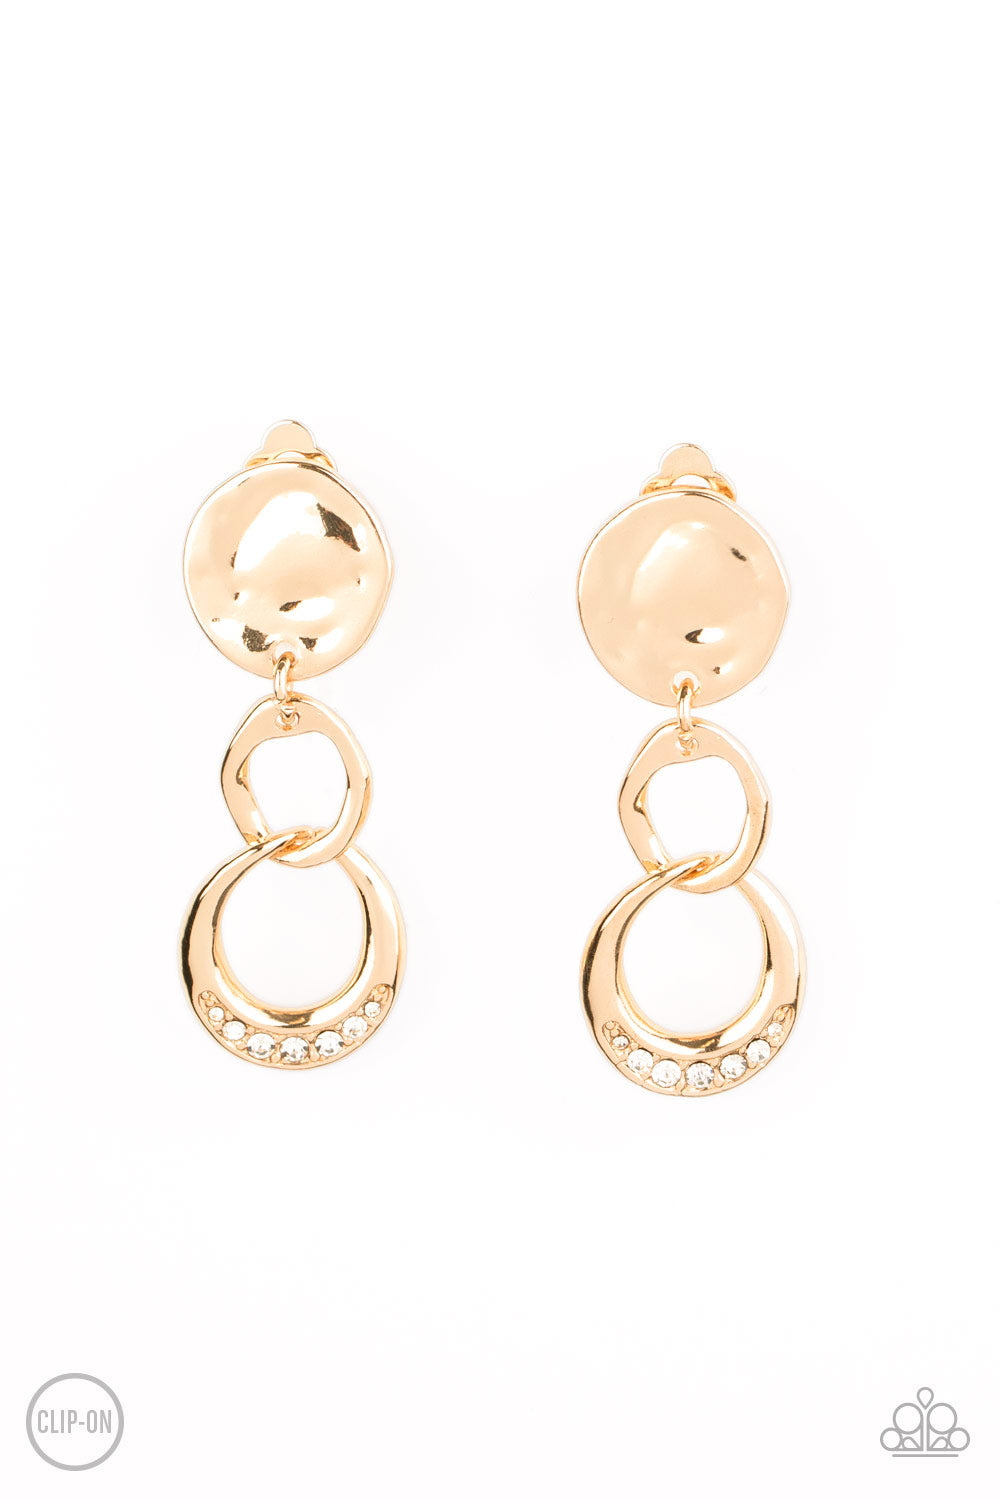 Paparazzi Reshaping Refinement - Gold Clip On Earrings - A Finishing Touch 